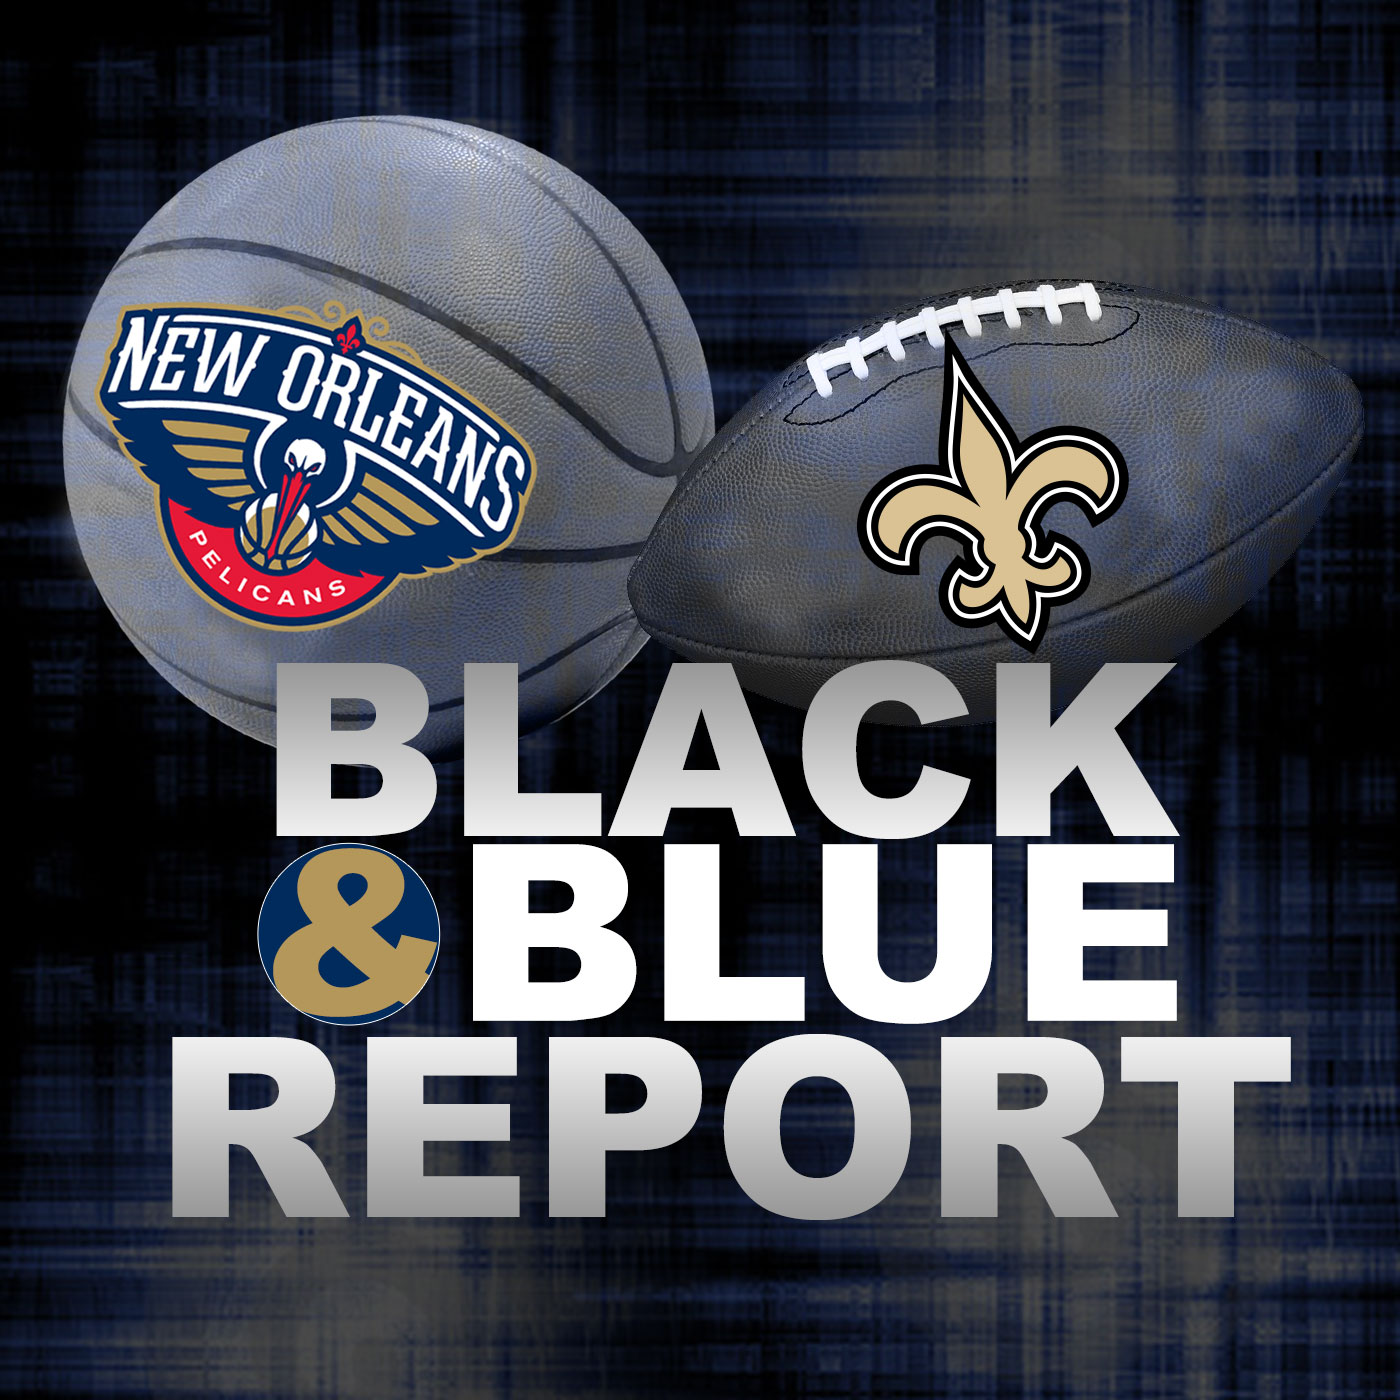 Jared Cook on the Black and Blue Report presented by SeatGeek - March 27, 2019